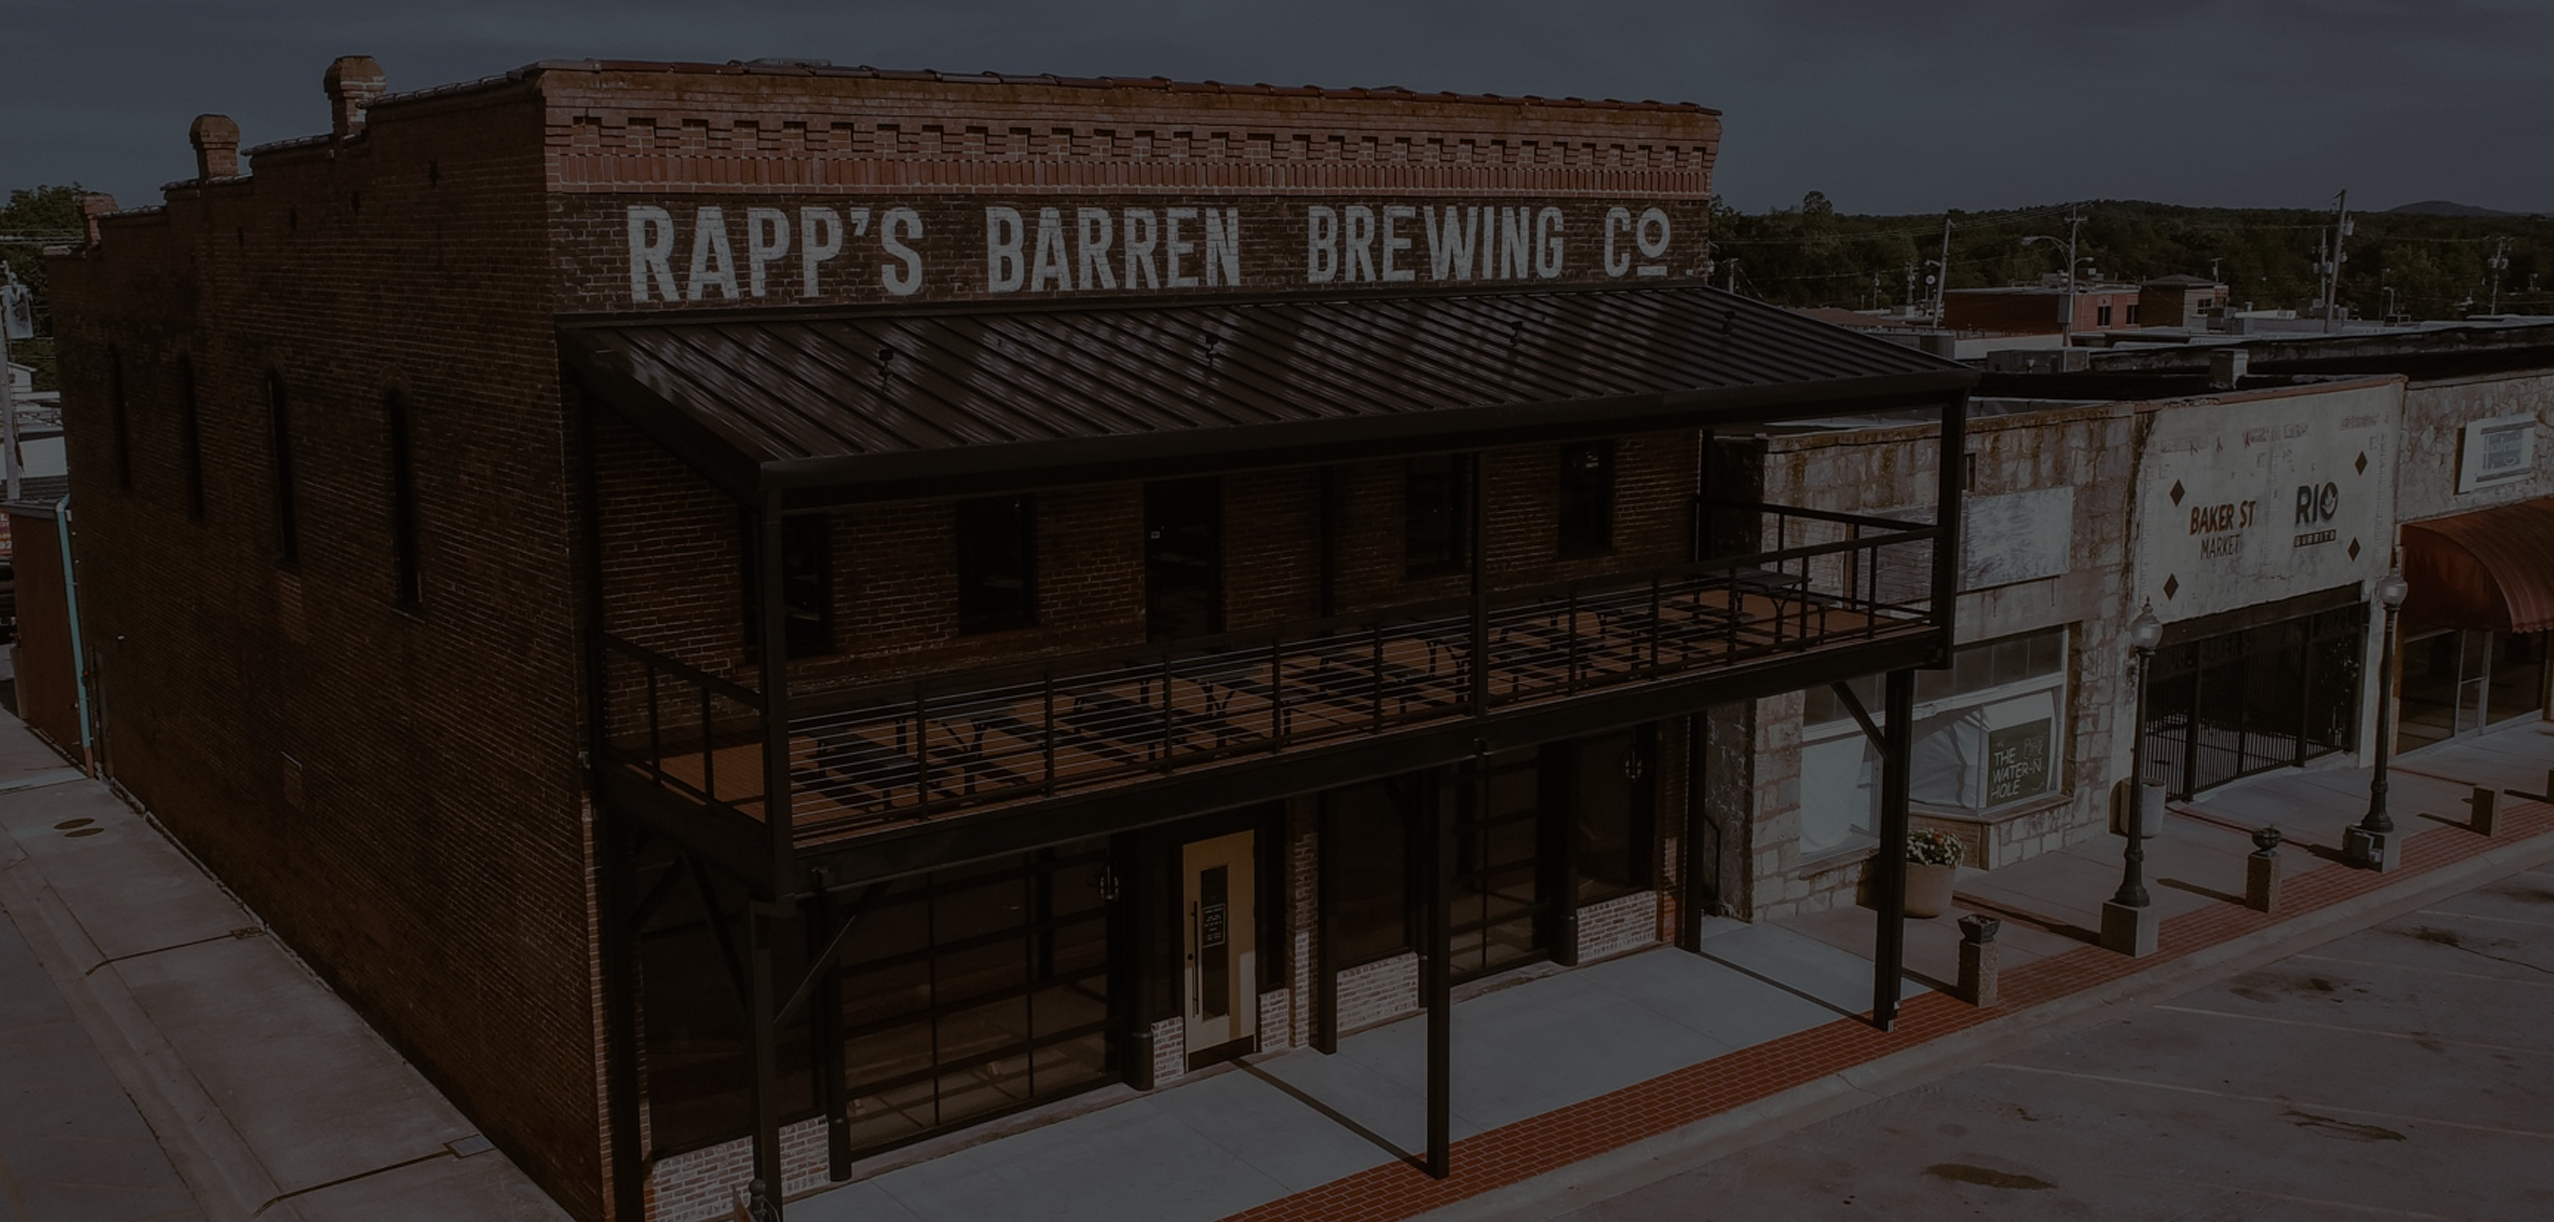 An aerial view of Rapp's Barren Brewing company in Mountain Home Arkansas offers, darkened for the website header page